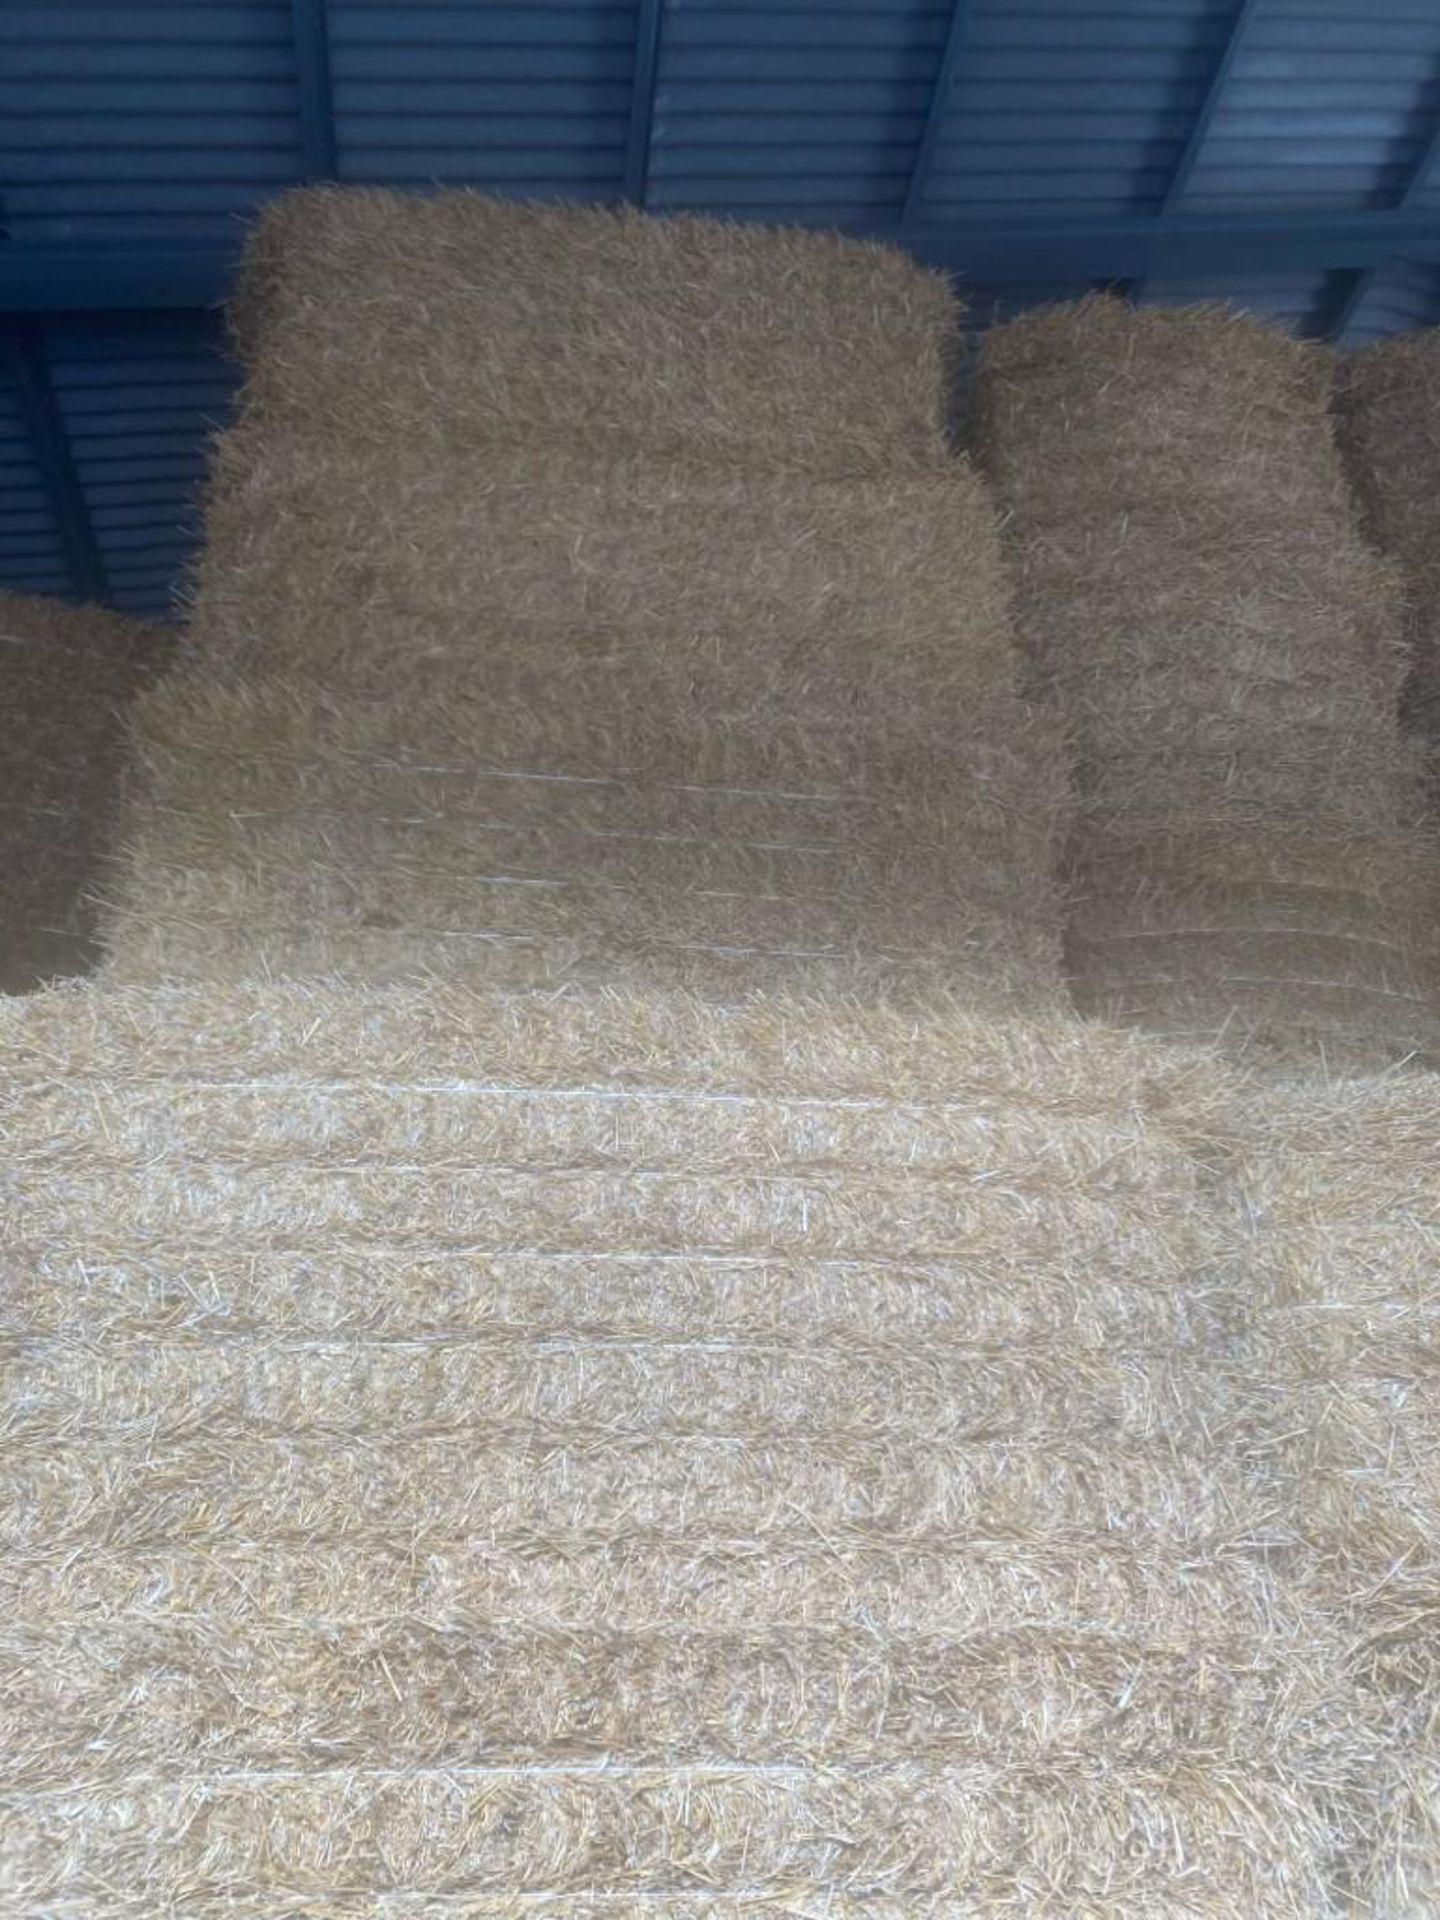 144 Bales of 2021 Wheat Straw - Image 2 of 4